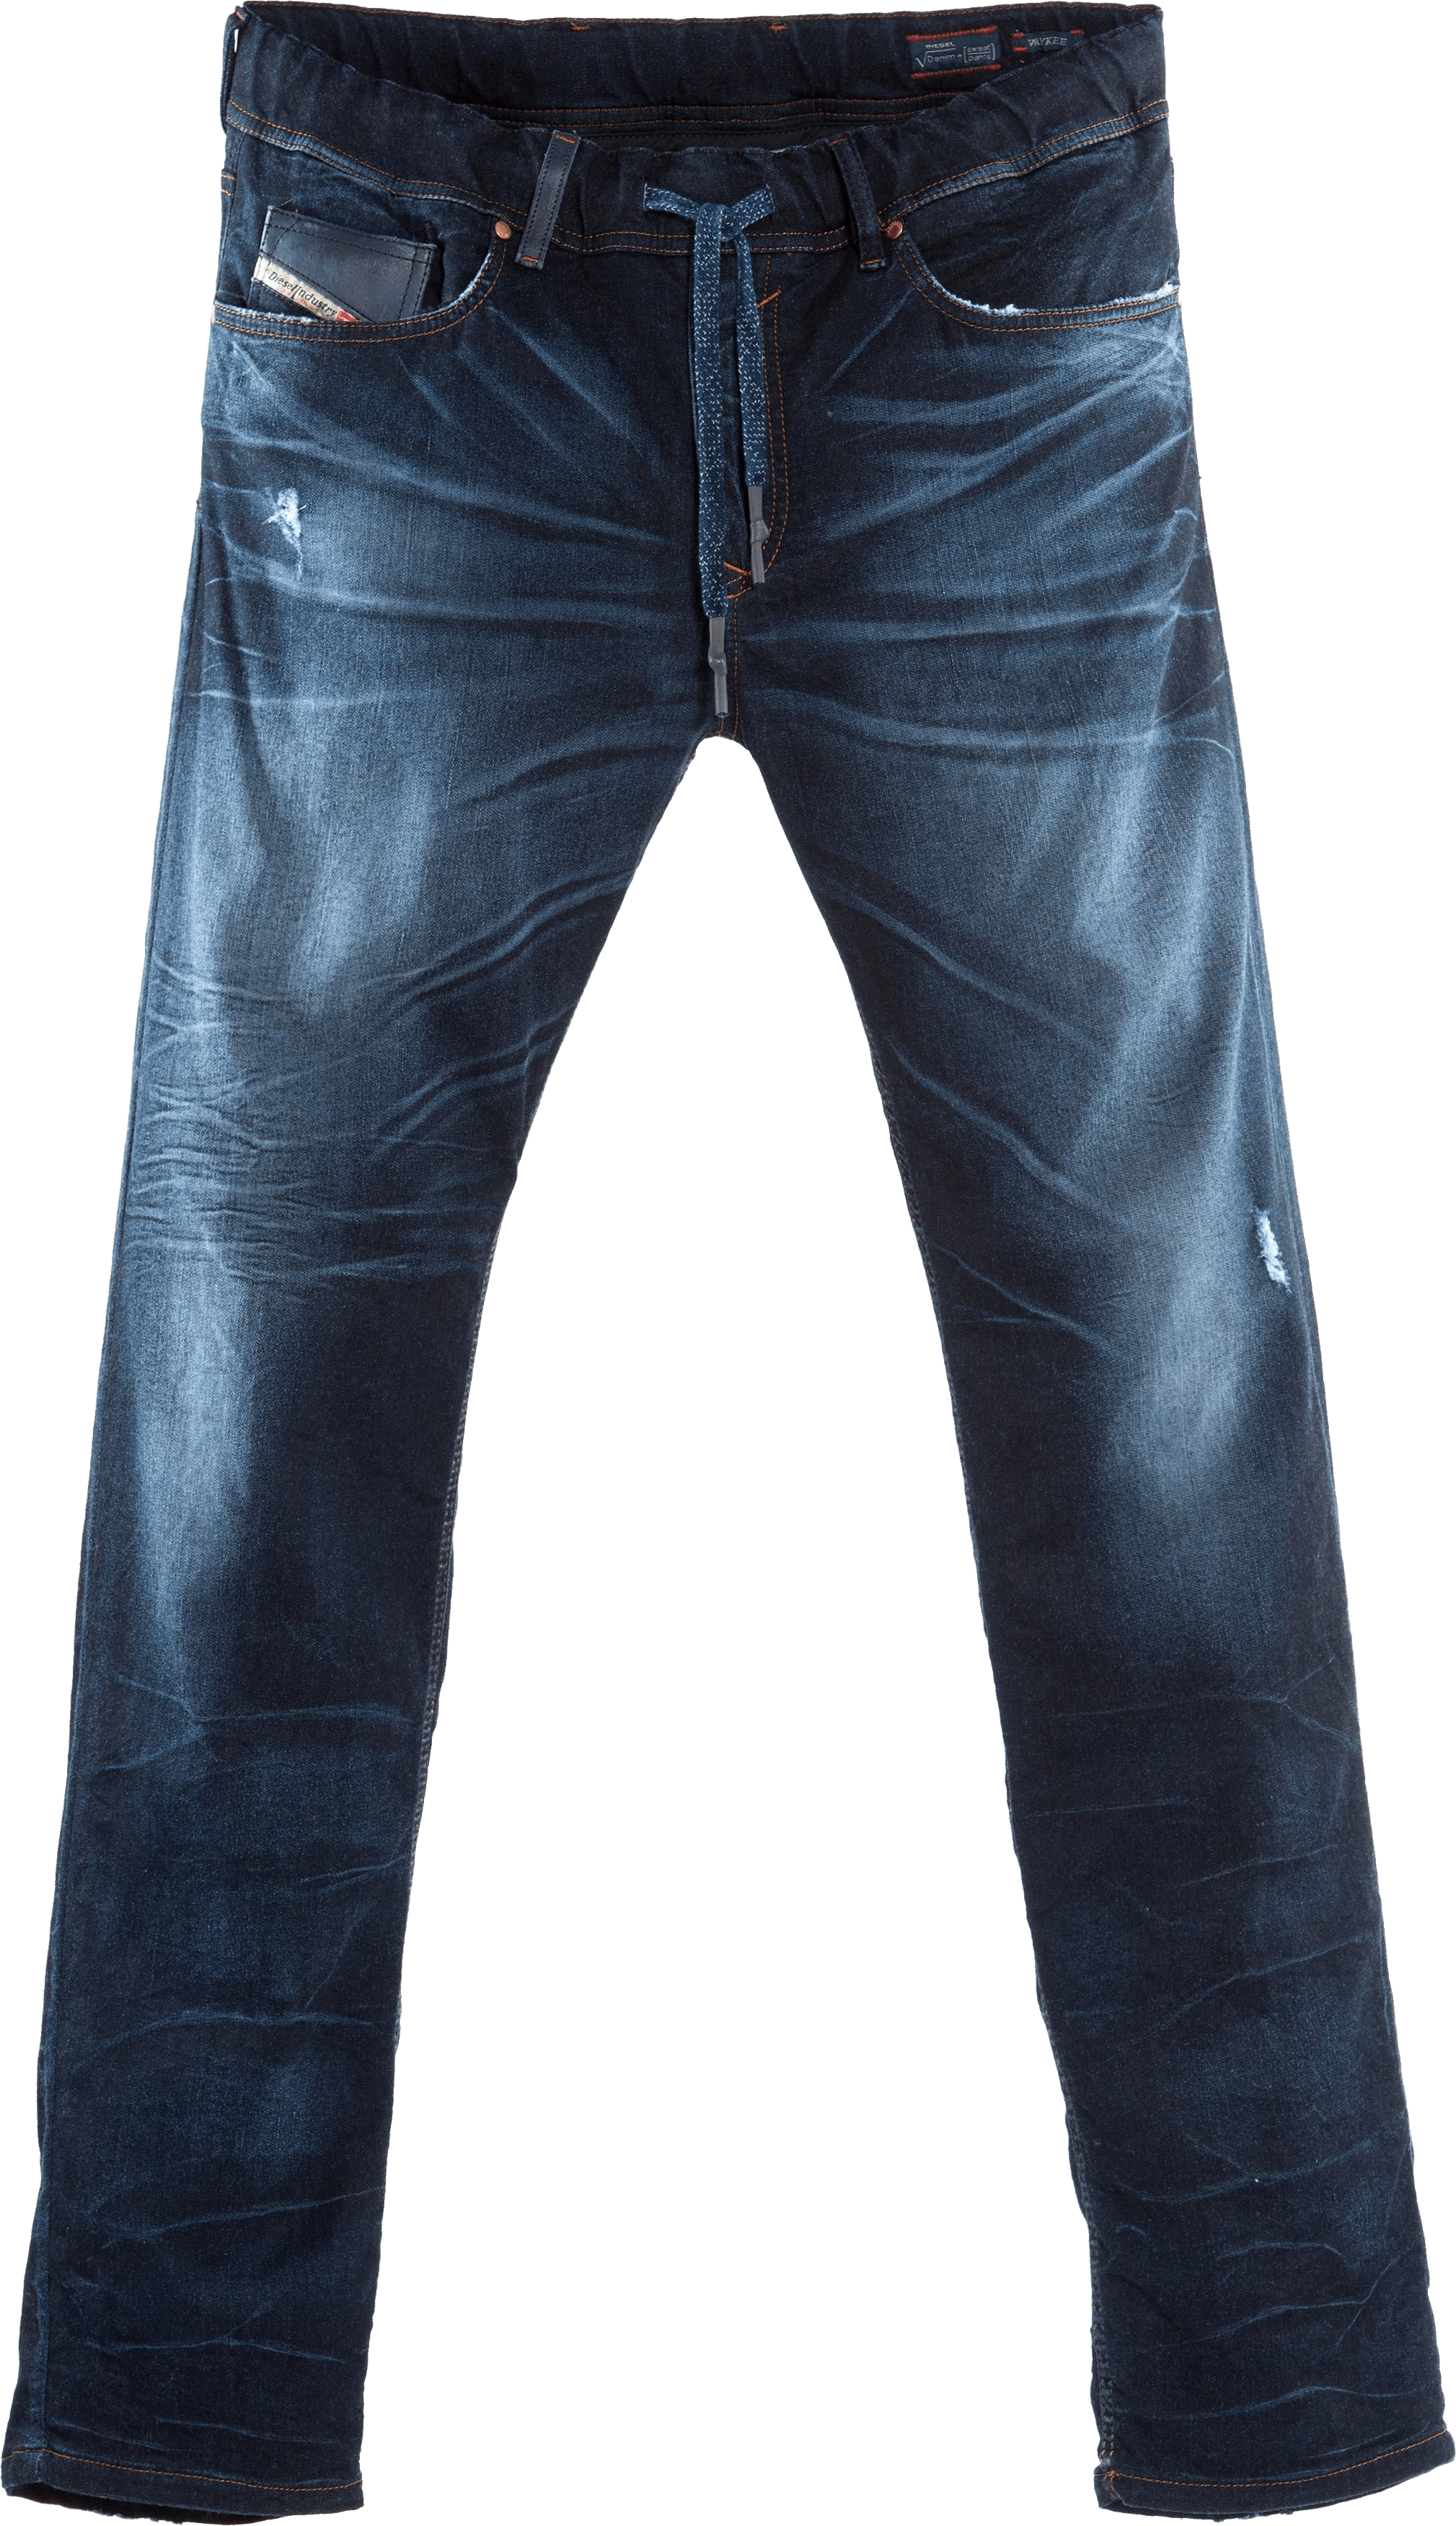 Black Jeans Png For Picsart / Here you can explore hq jeans transparent ...